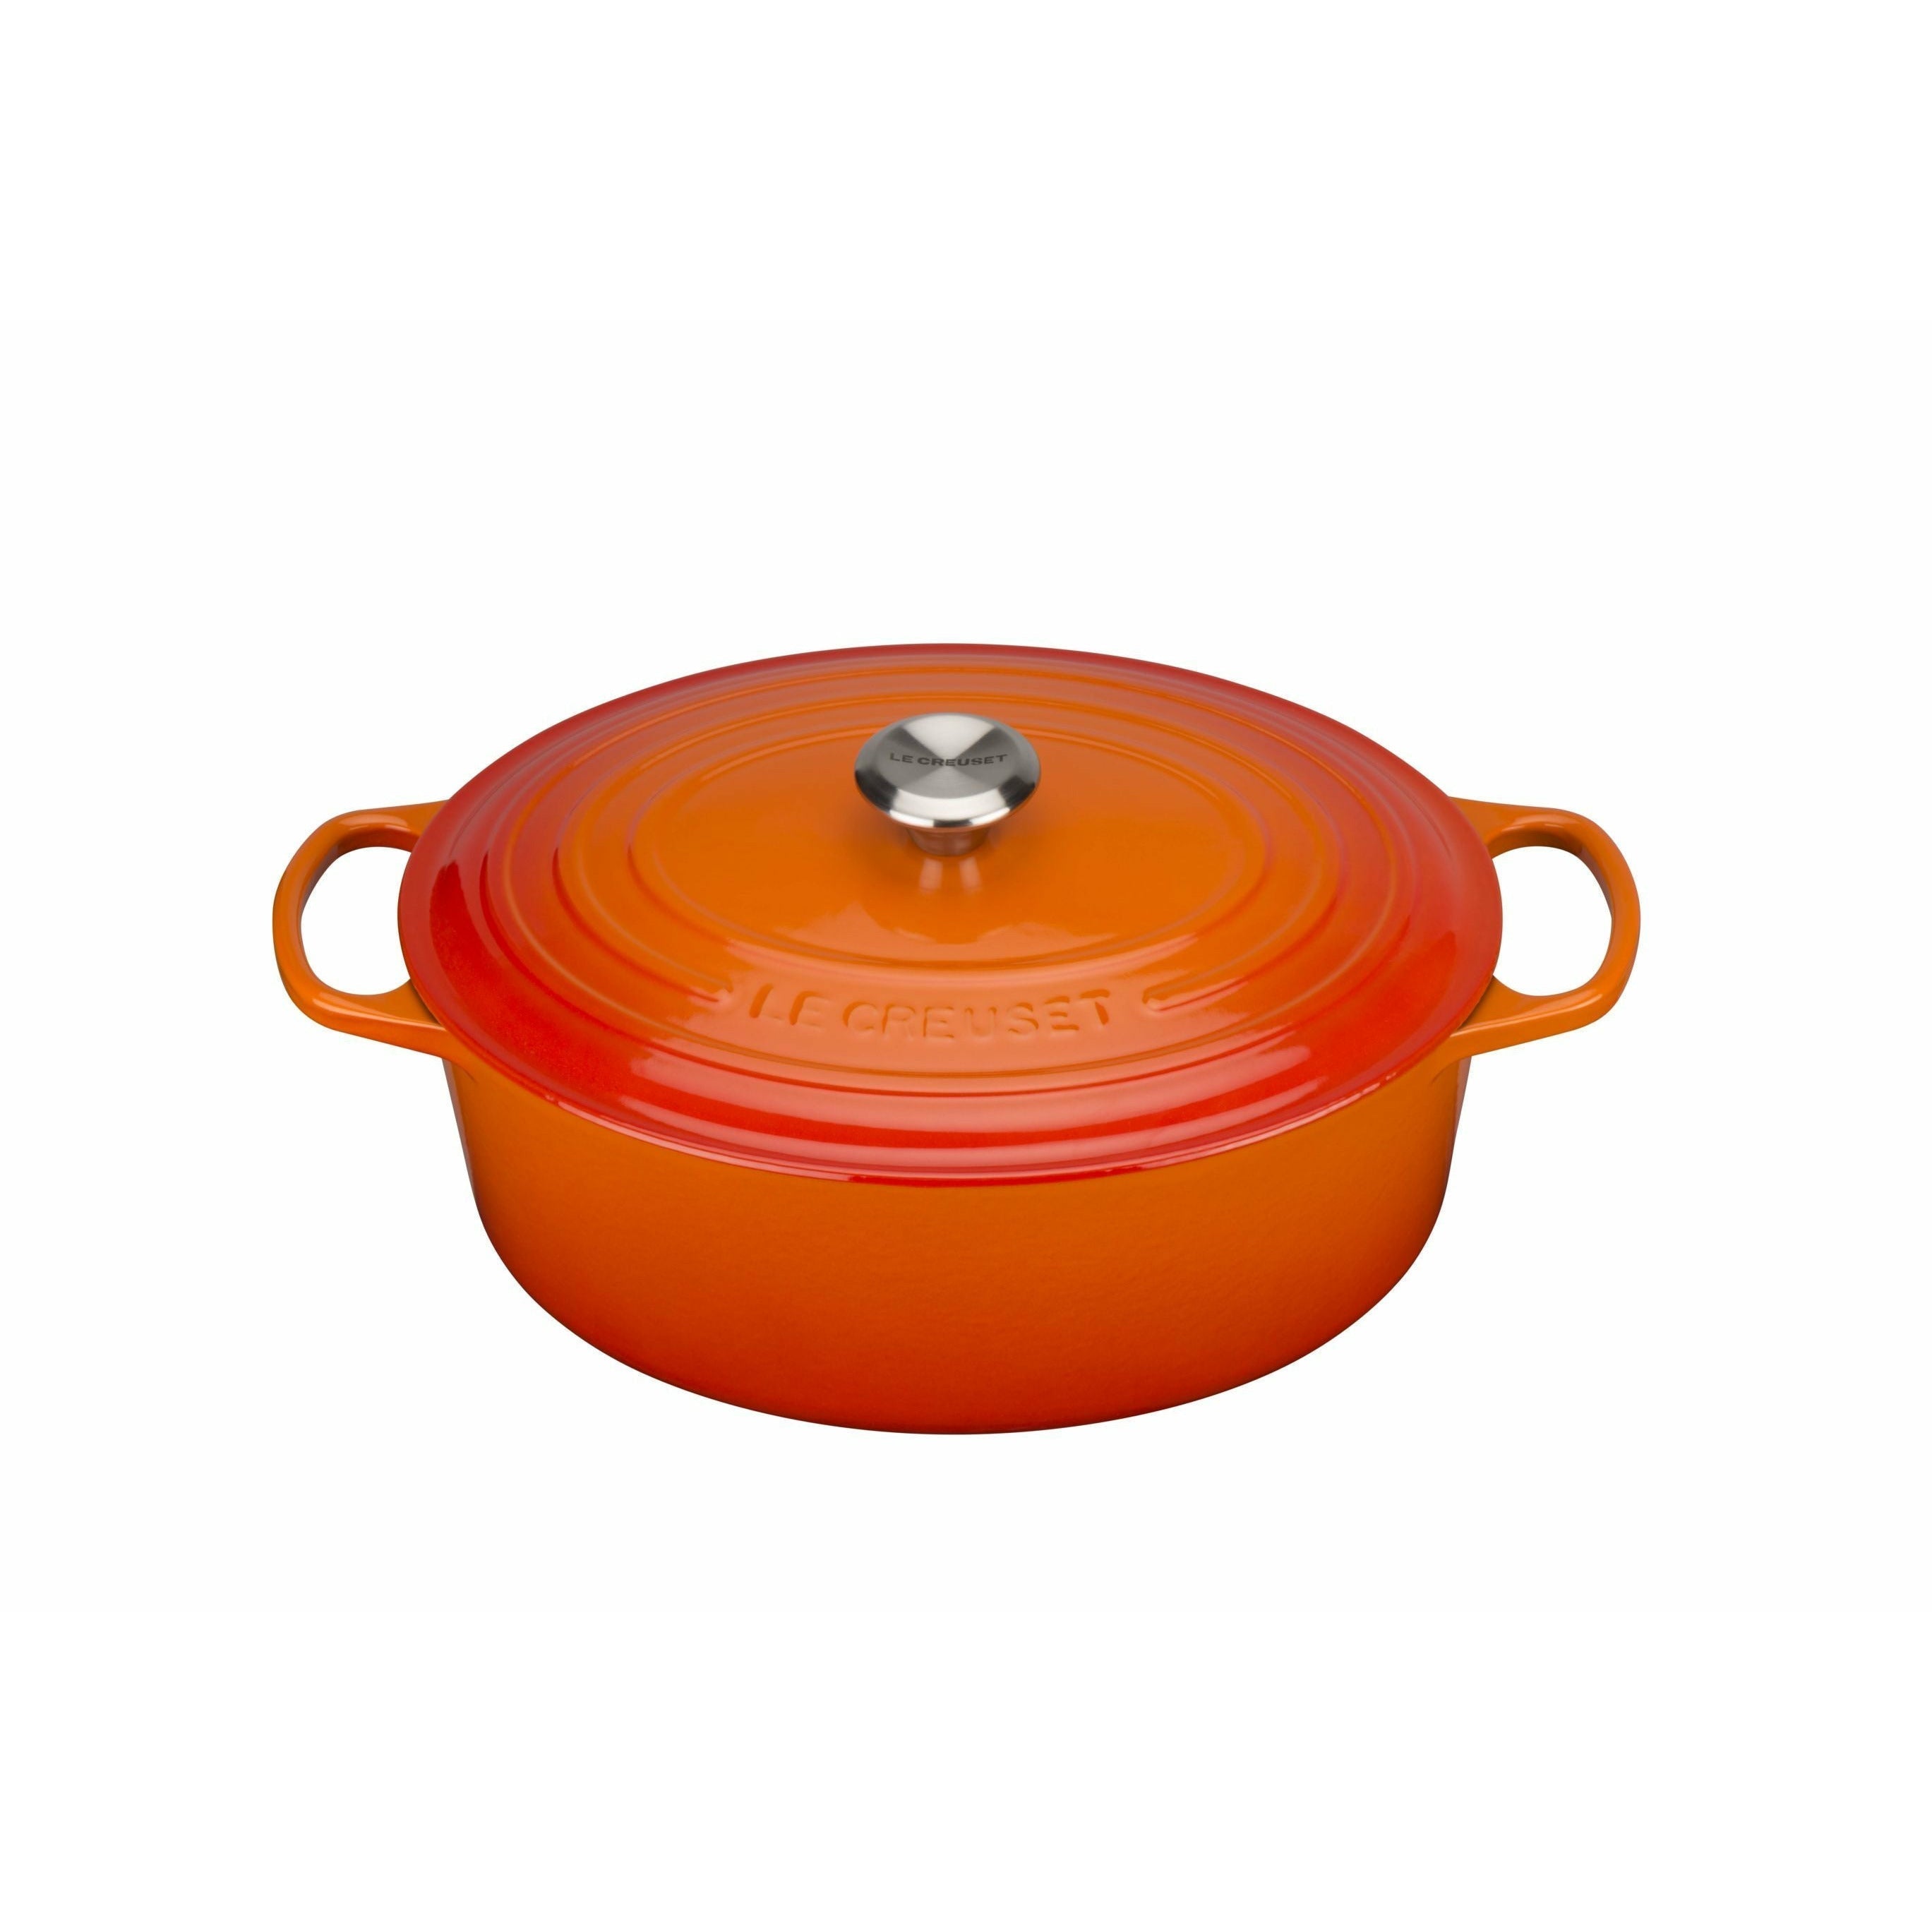 Le Creuset Signature Oval Roaster 33 Cm, Oven Red